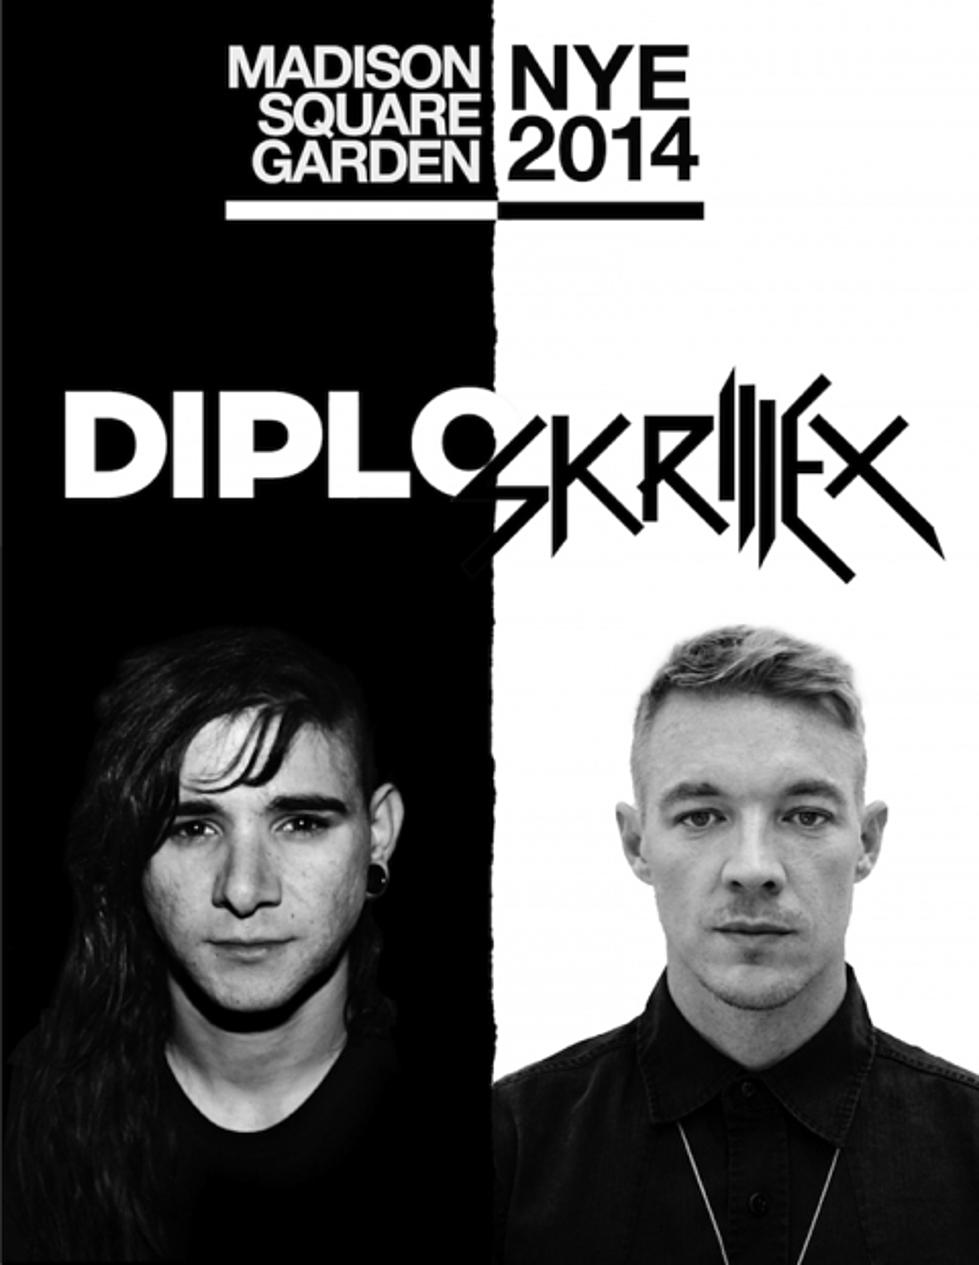 Diplo &#038; Skrillex playing MSG on New Year&#8217;s Eve, released &#8220;Take U There&#8221; ft. Kiesza (listen + dates)